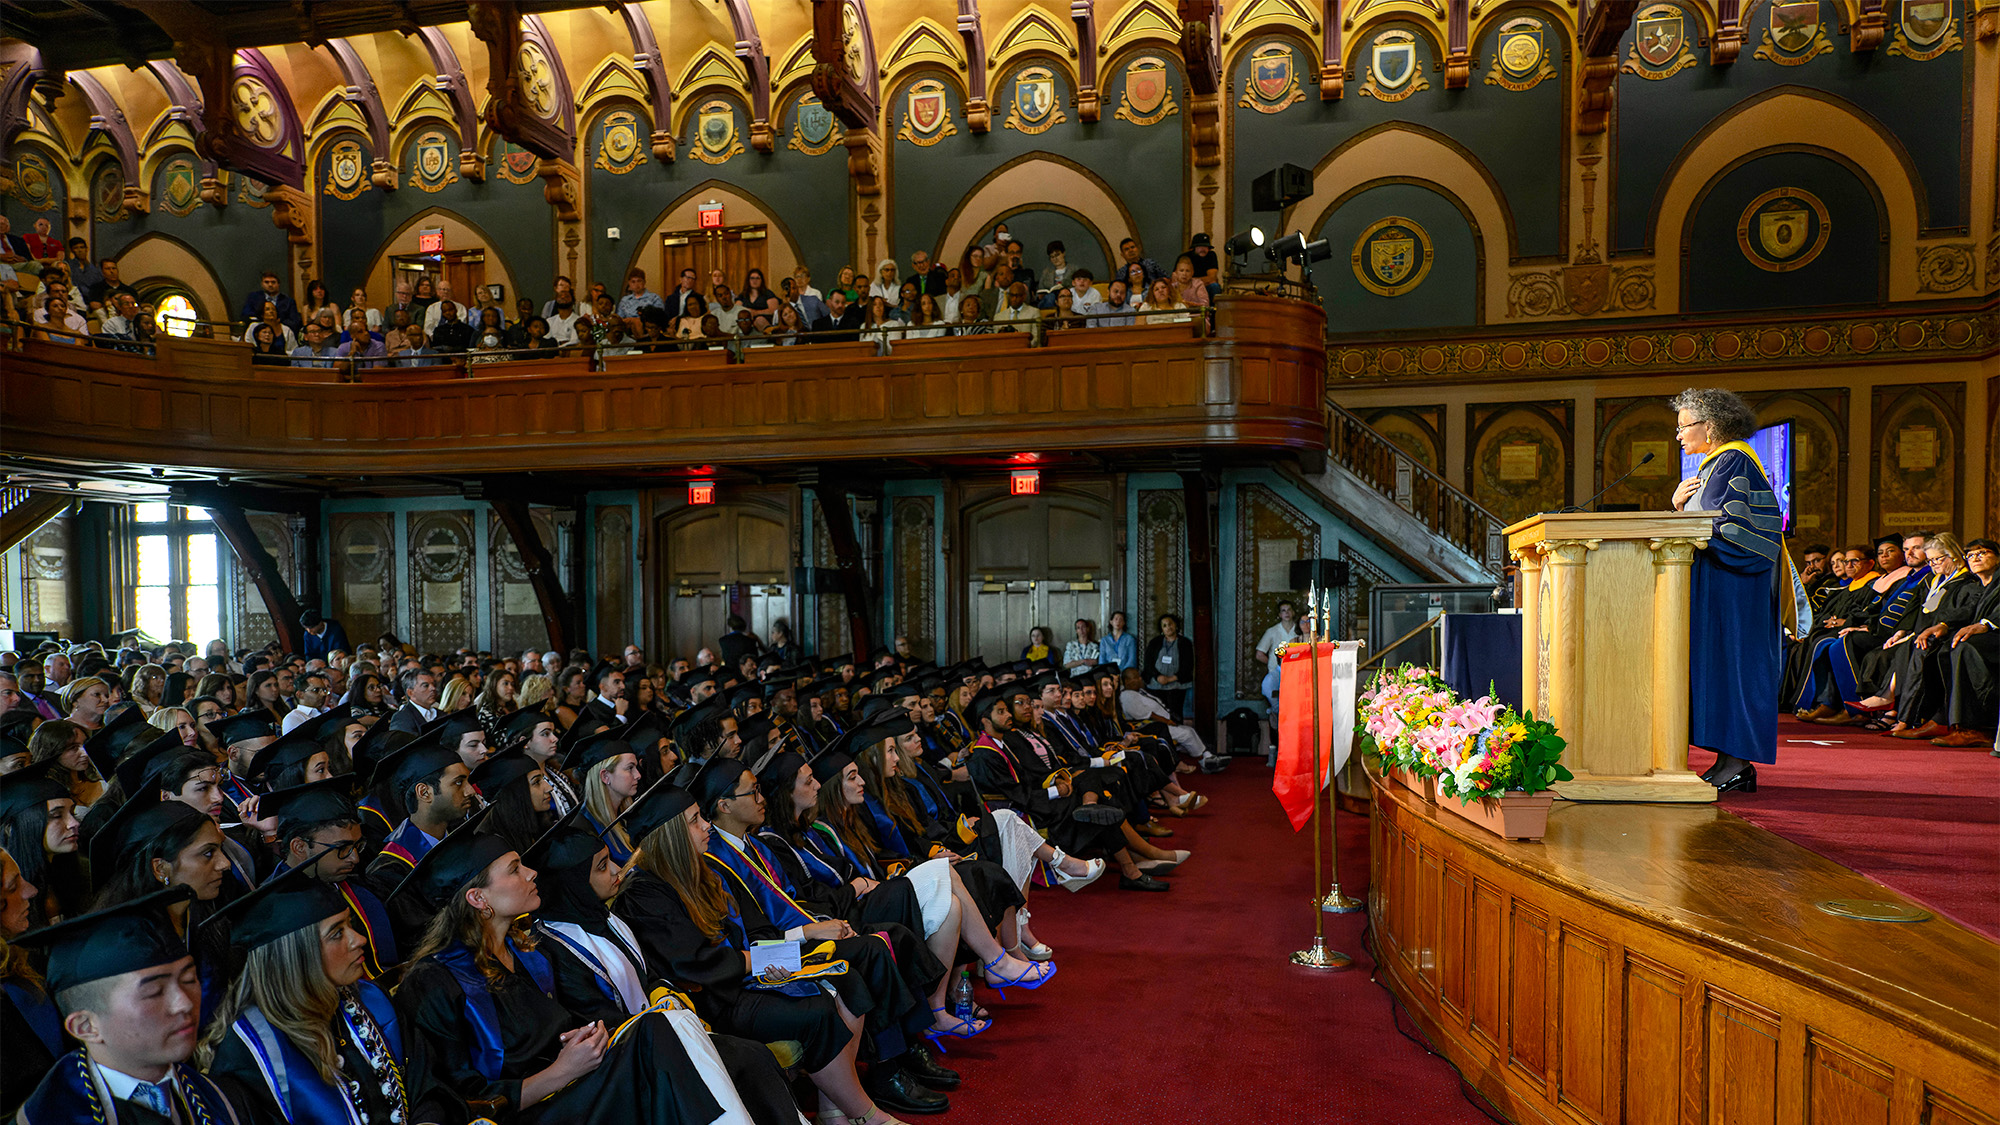 The School of Health commencement in Gaston Hall